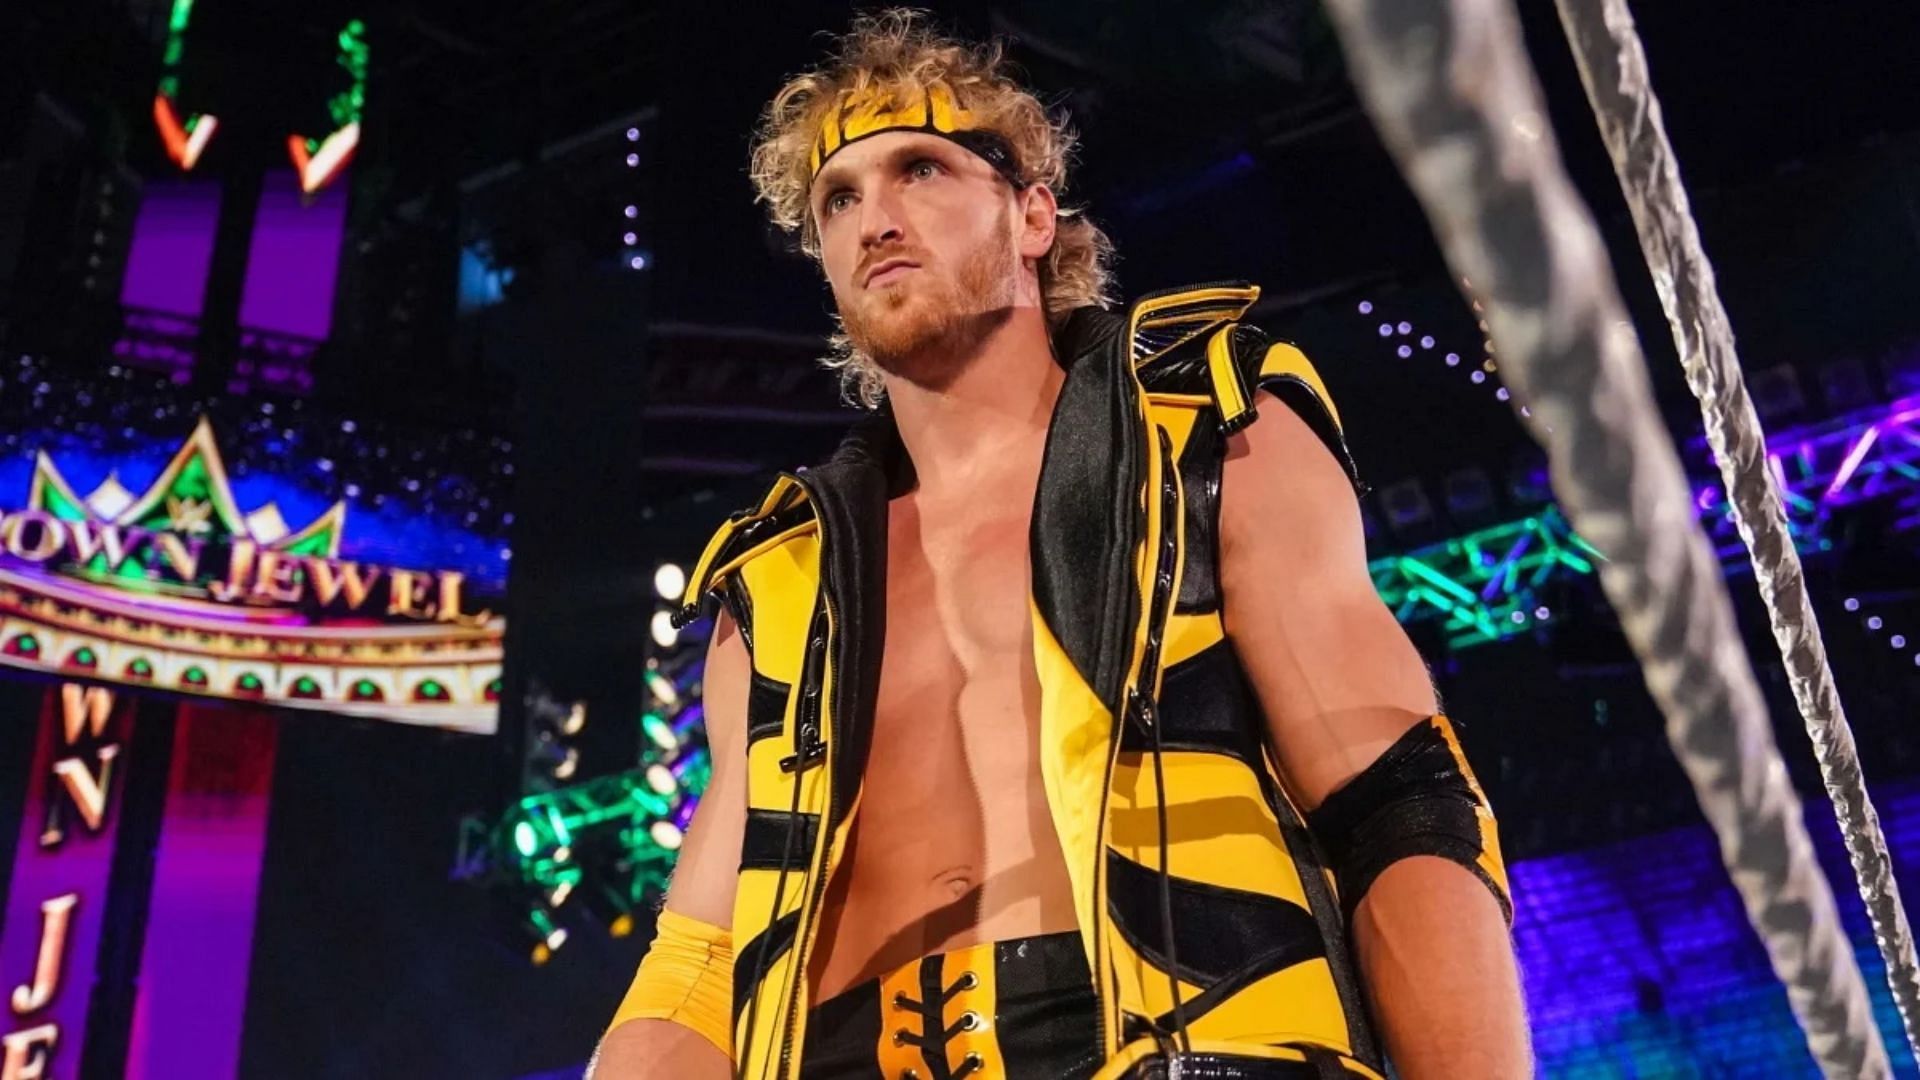 Logan Paul has impressed many in the WWE ring